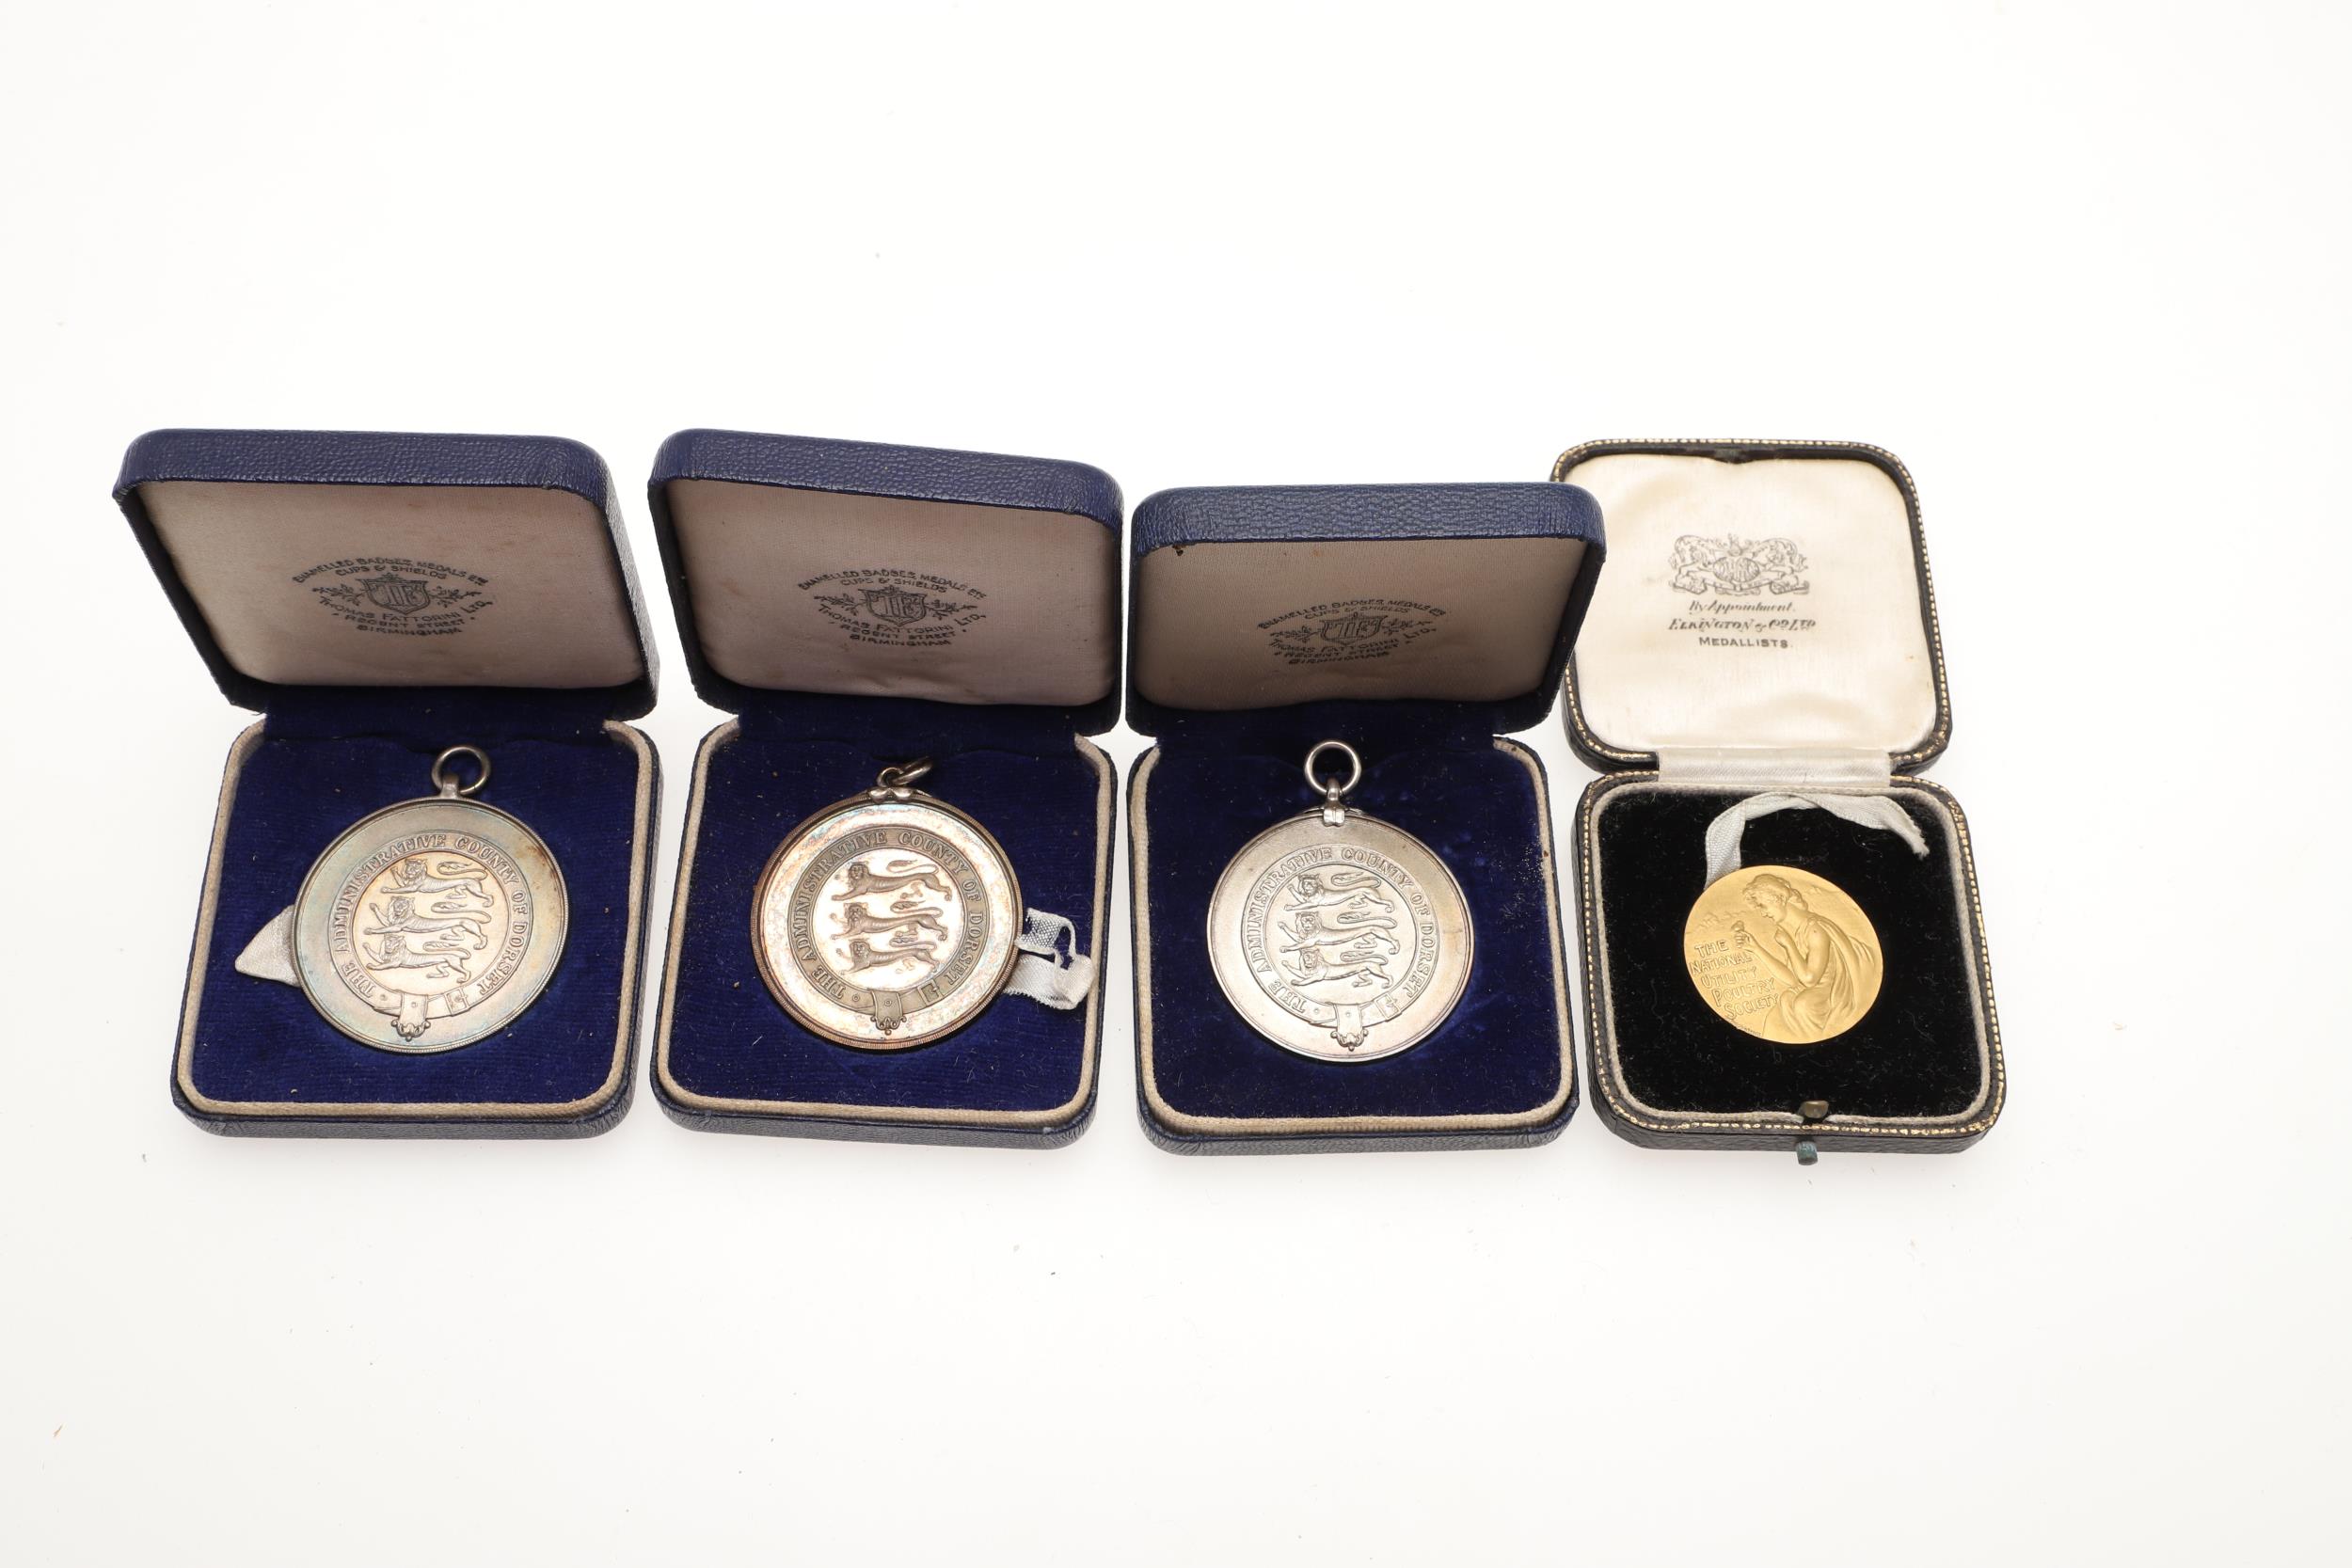 AN EXTENSIVE COLLECTION OF GOLD, SILVER AND BRONZE MEDALS FOR EGG LAYING. - Image 20 of 23